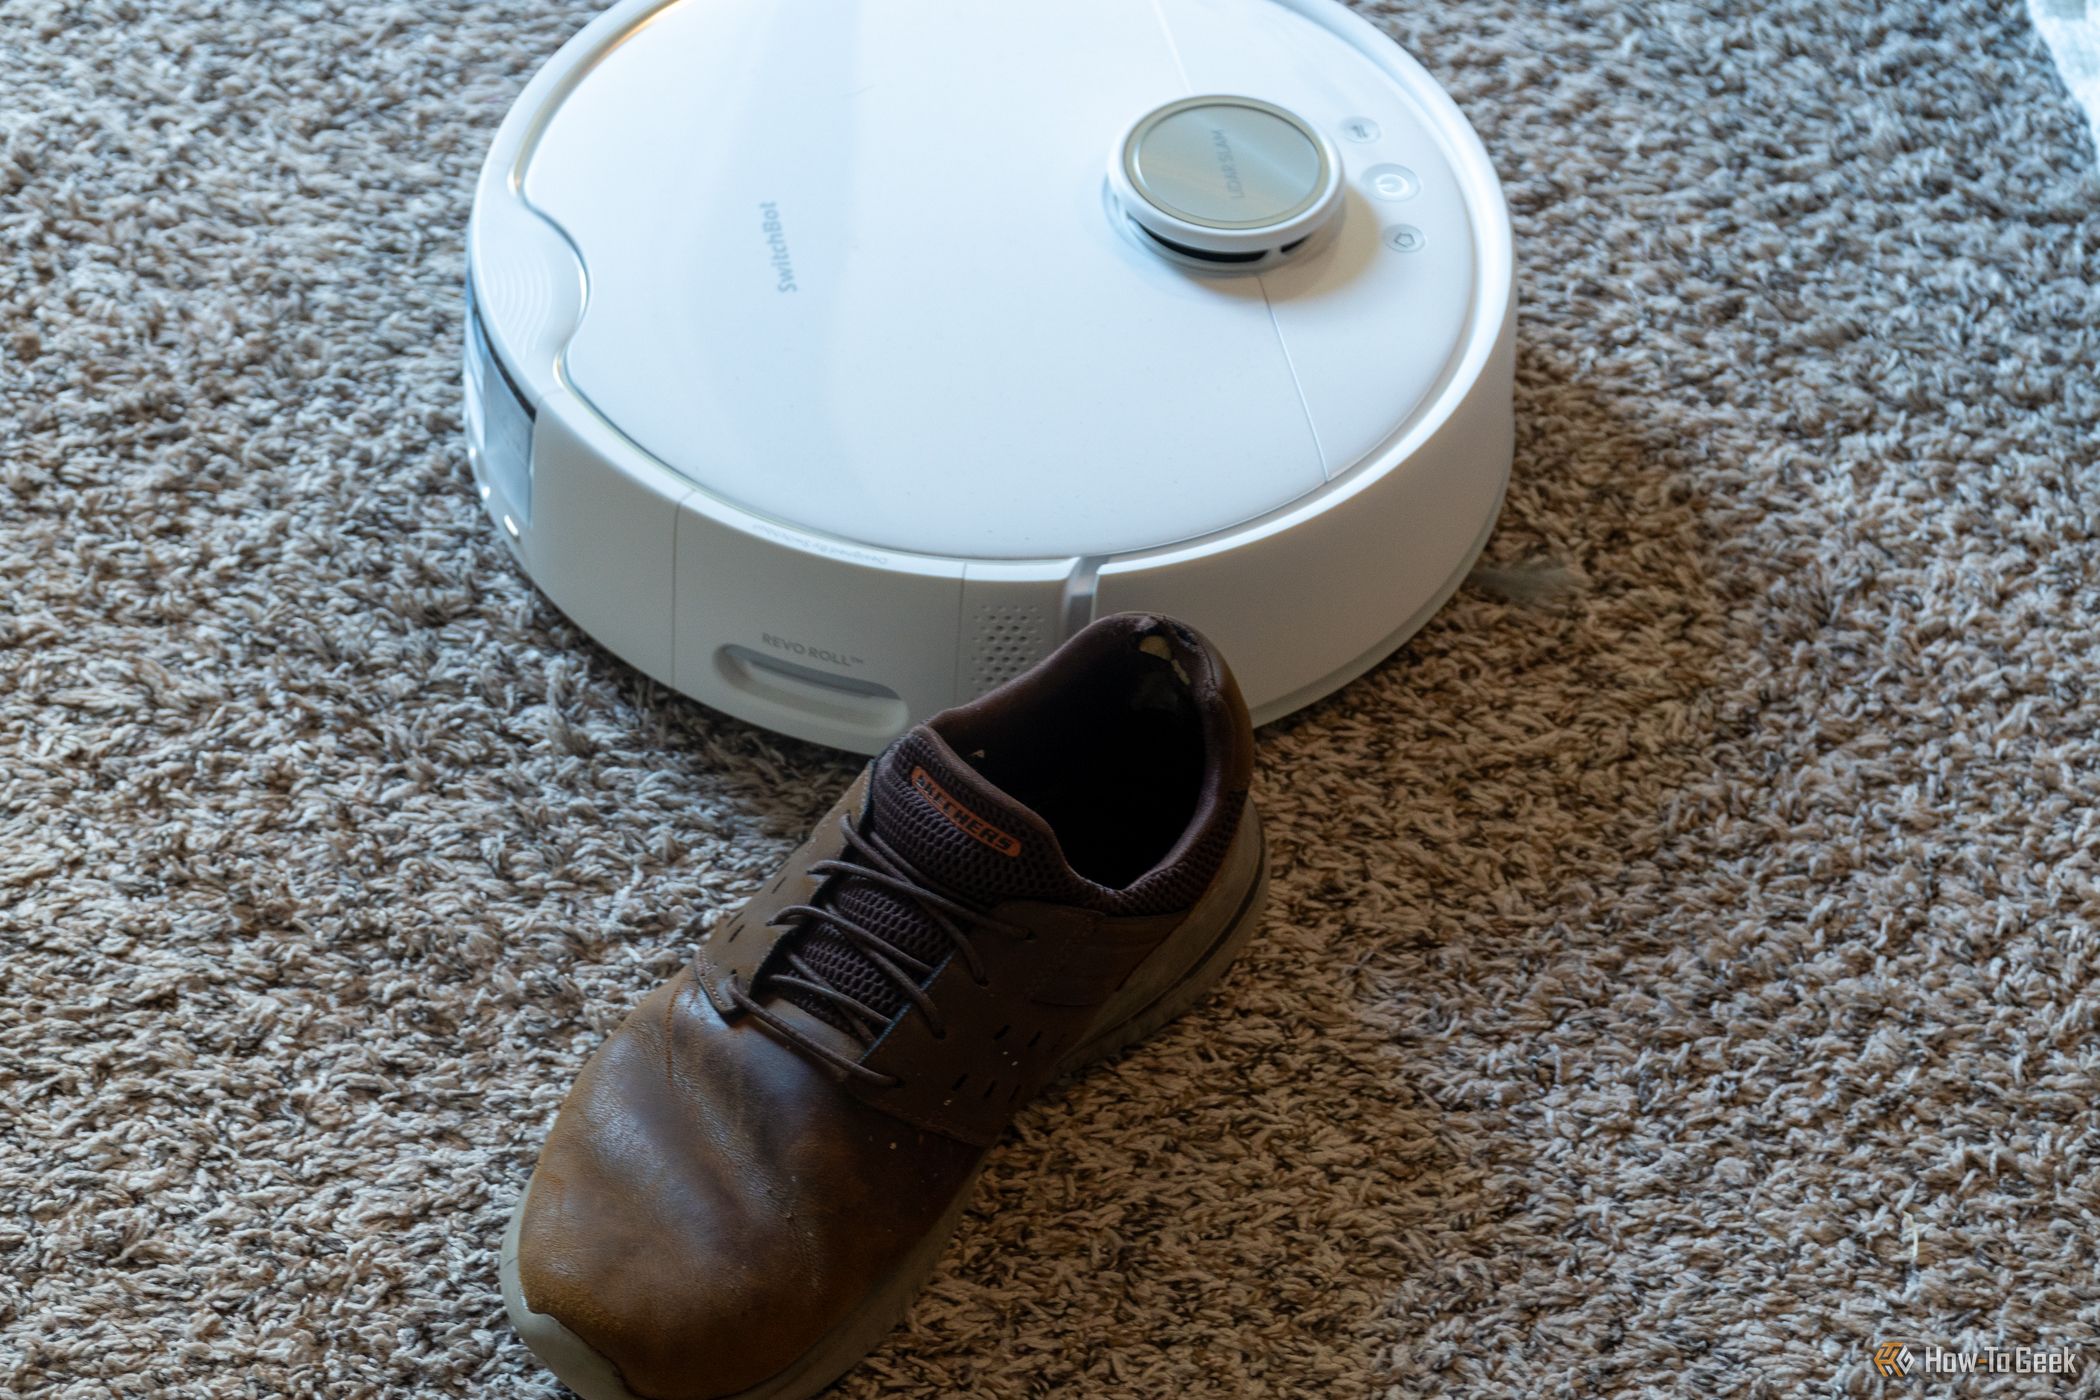 SwitchBot S10 Robot Vacuum AI Object Detection Moving Around Shoe